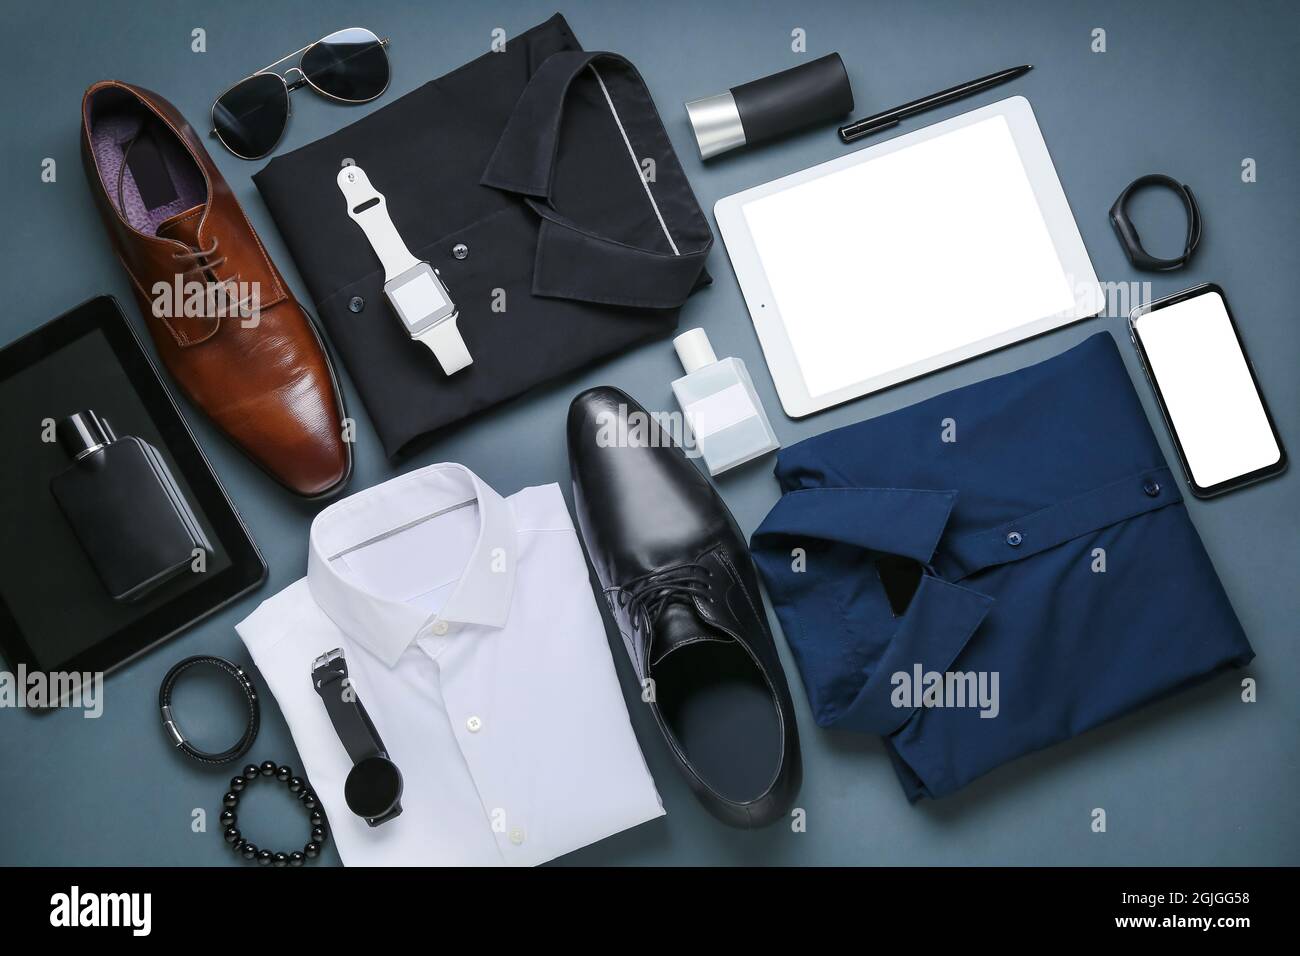 Stylish male clothes, gadgets and accessories on dark background Stock  Photo - Alamy